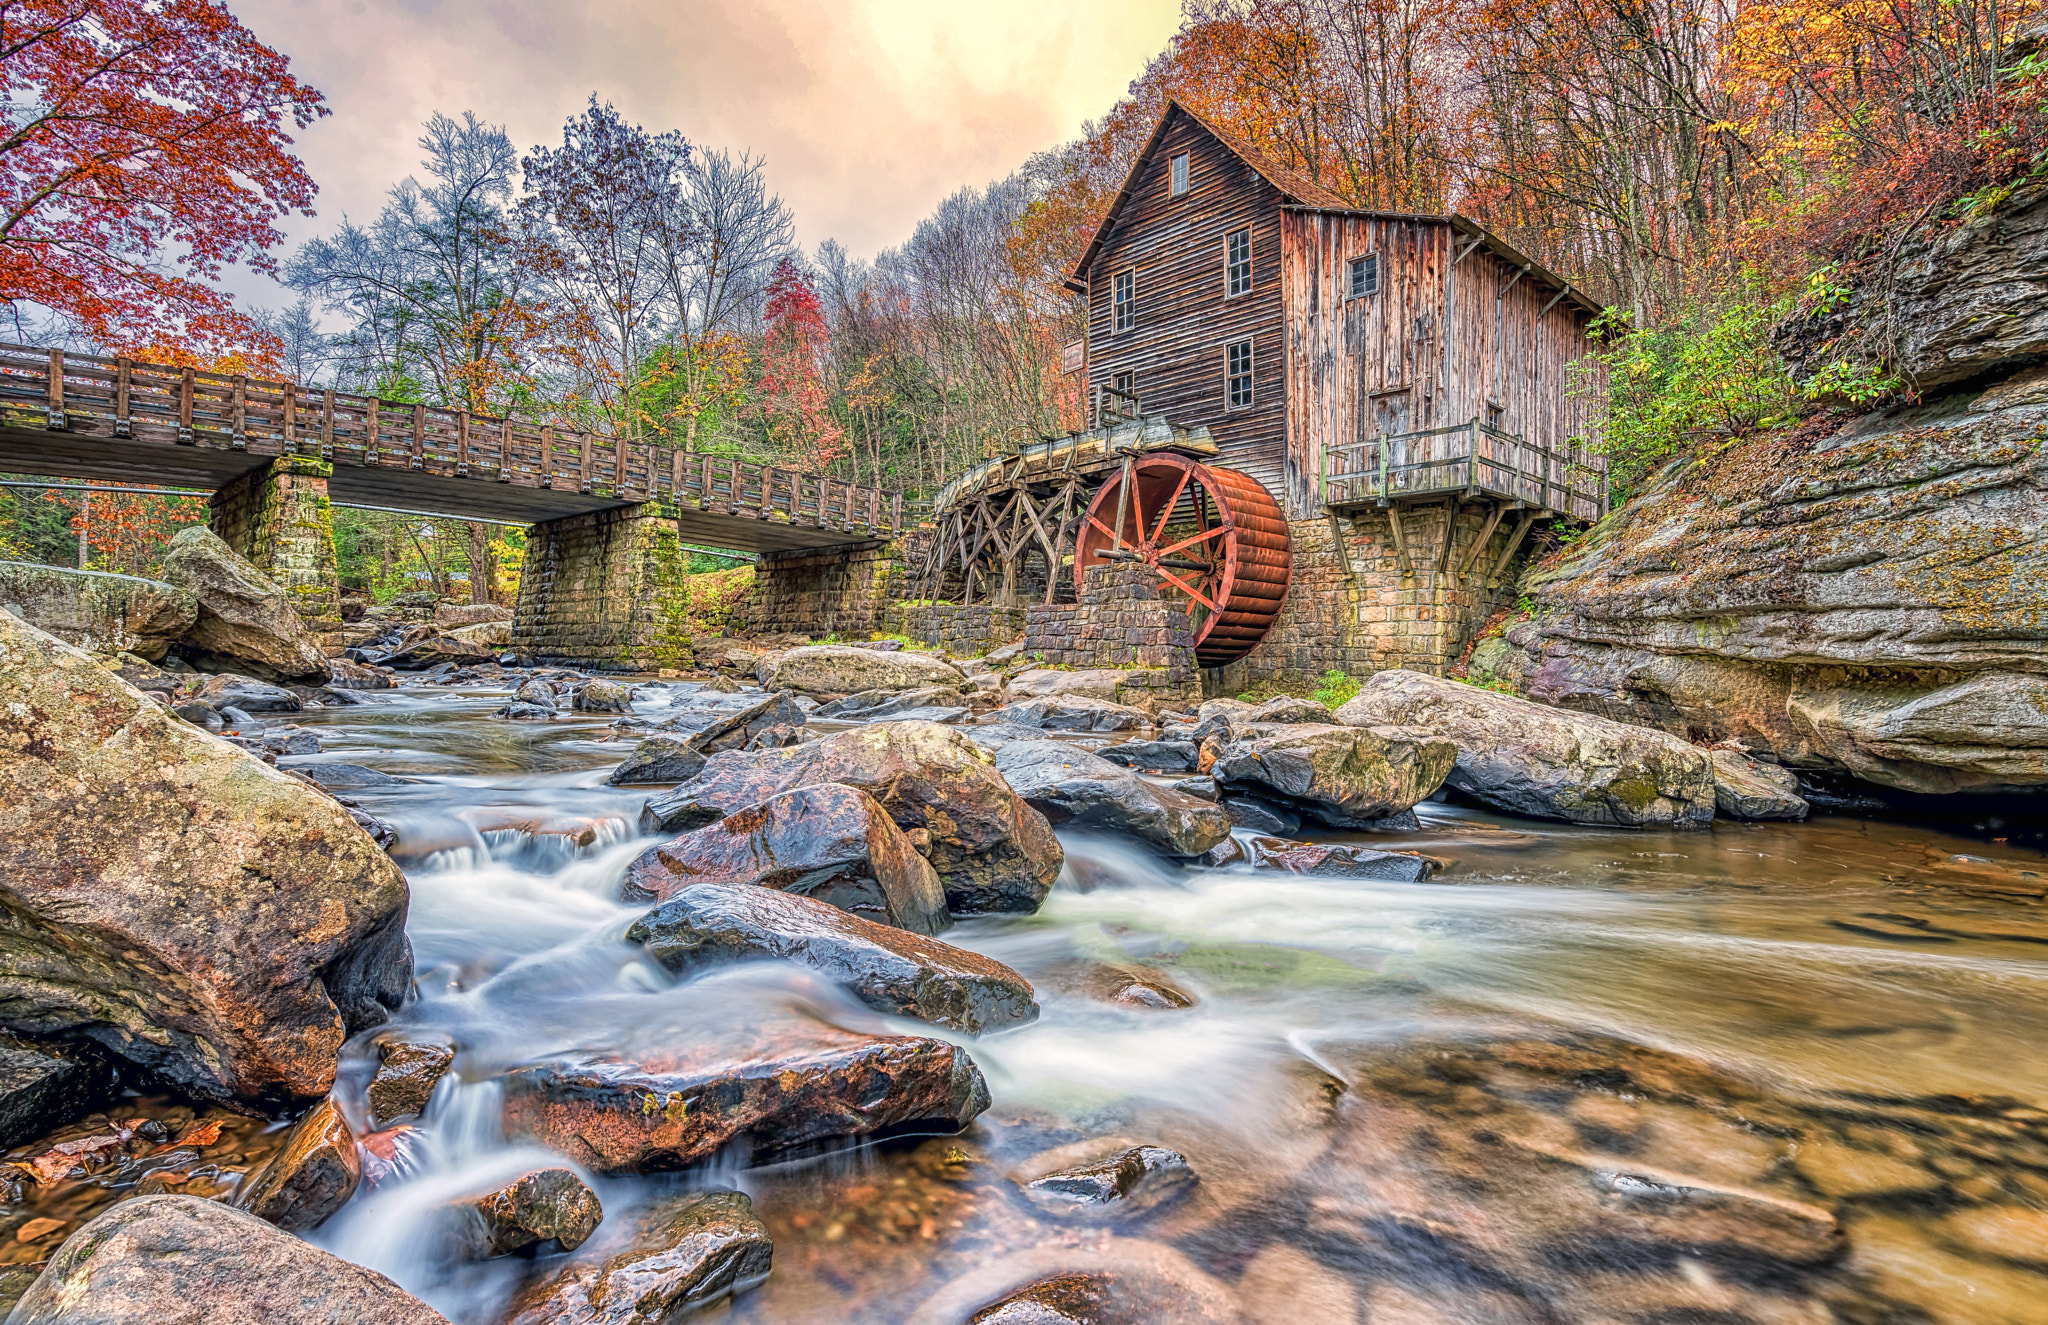 Sony a7R II sample photo. Grist mill at babcock state park photography